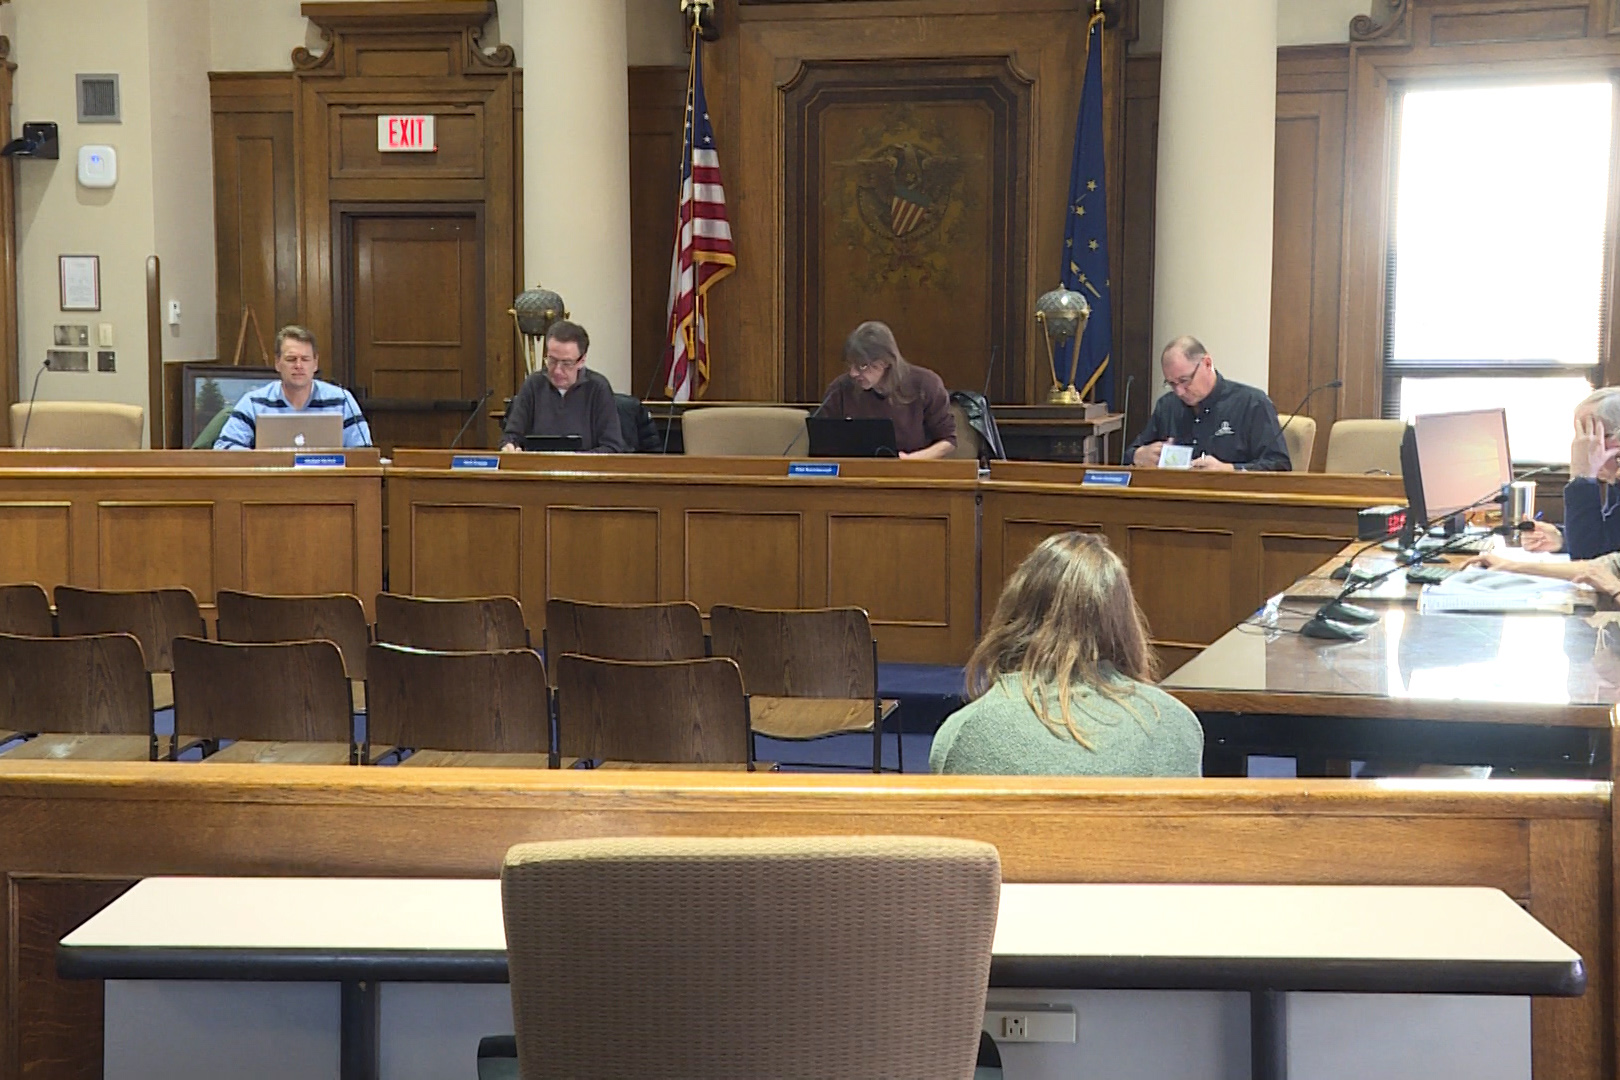 The Bloomington Board Of Zoning Appeals sitting in the Nat U Hill room of the Monroe County Courthouse